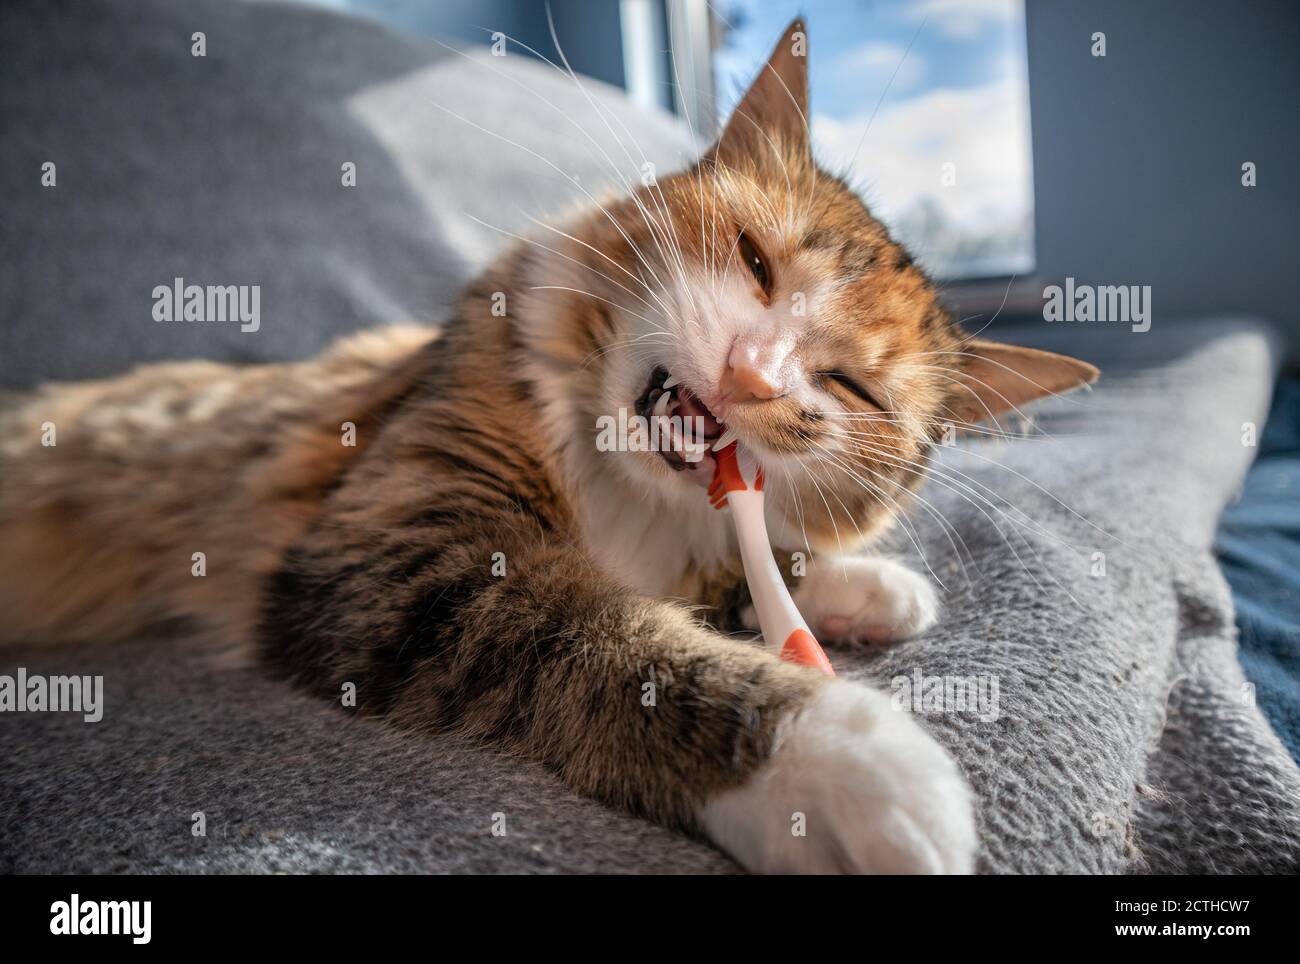 Close up cat chewing on toothbrush. Pets dental health month in February. Cat with tooth brush in mouth. Cats teeth are visible incl. fangs. Stock Photo